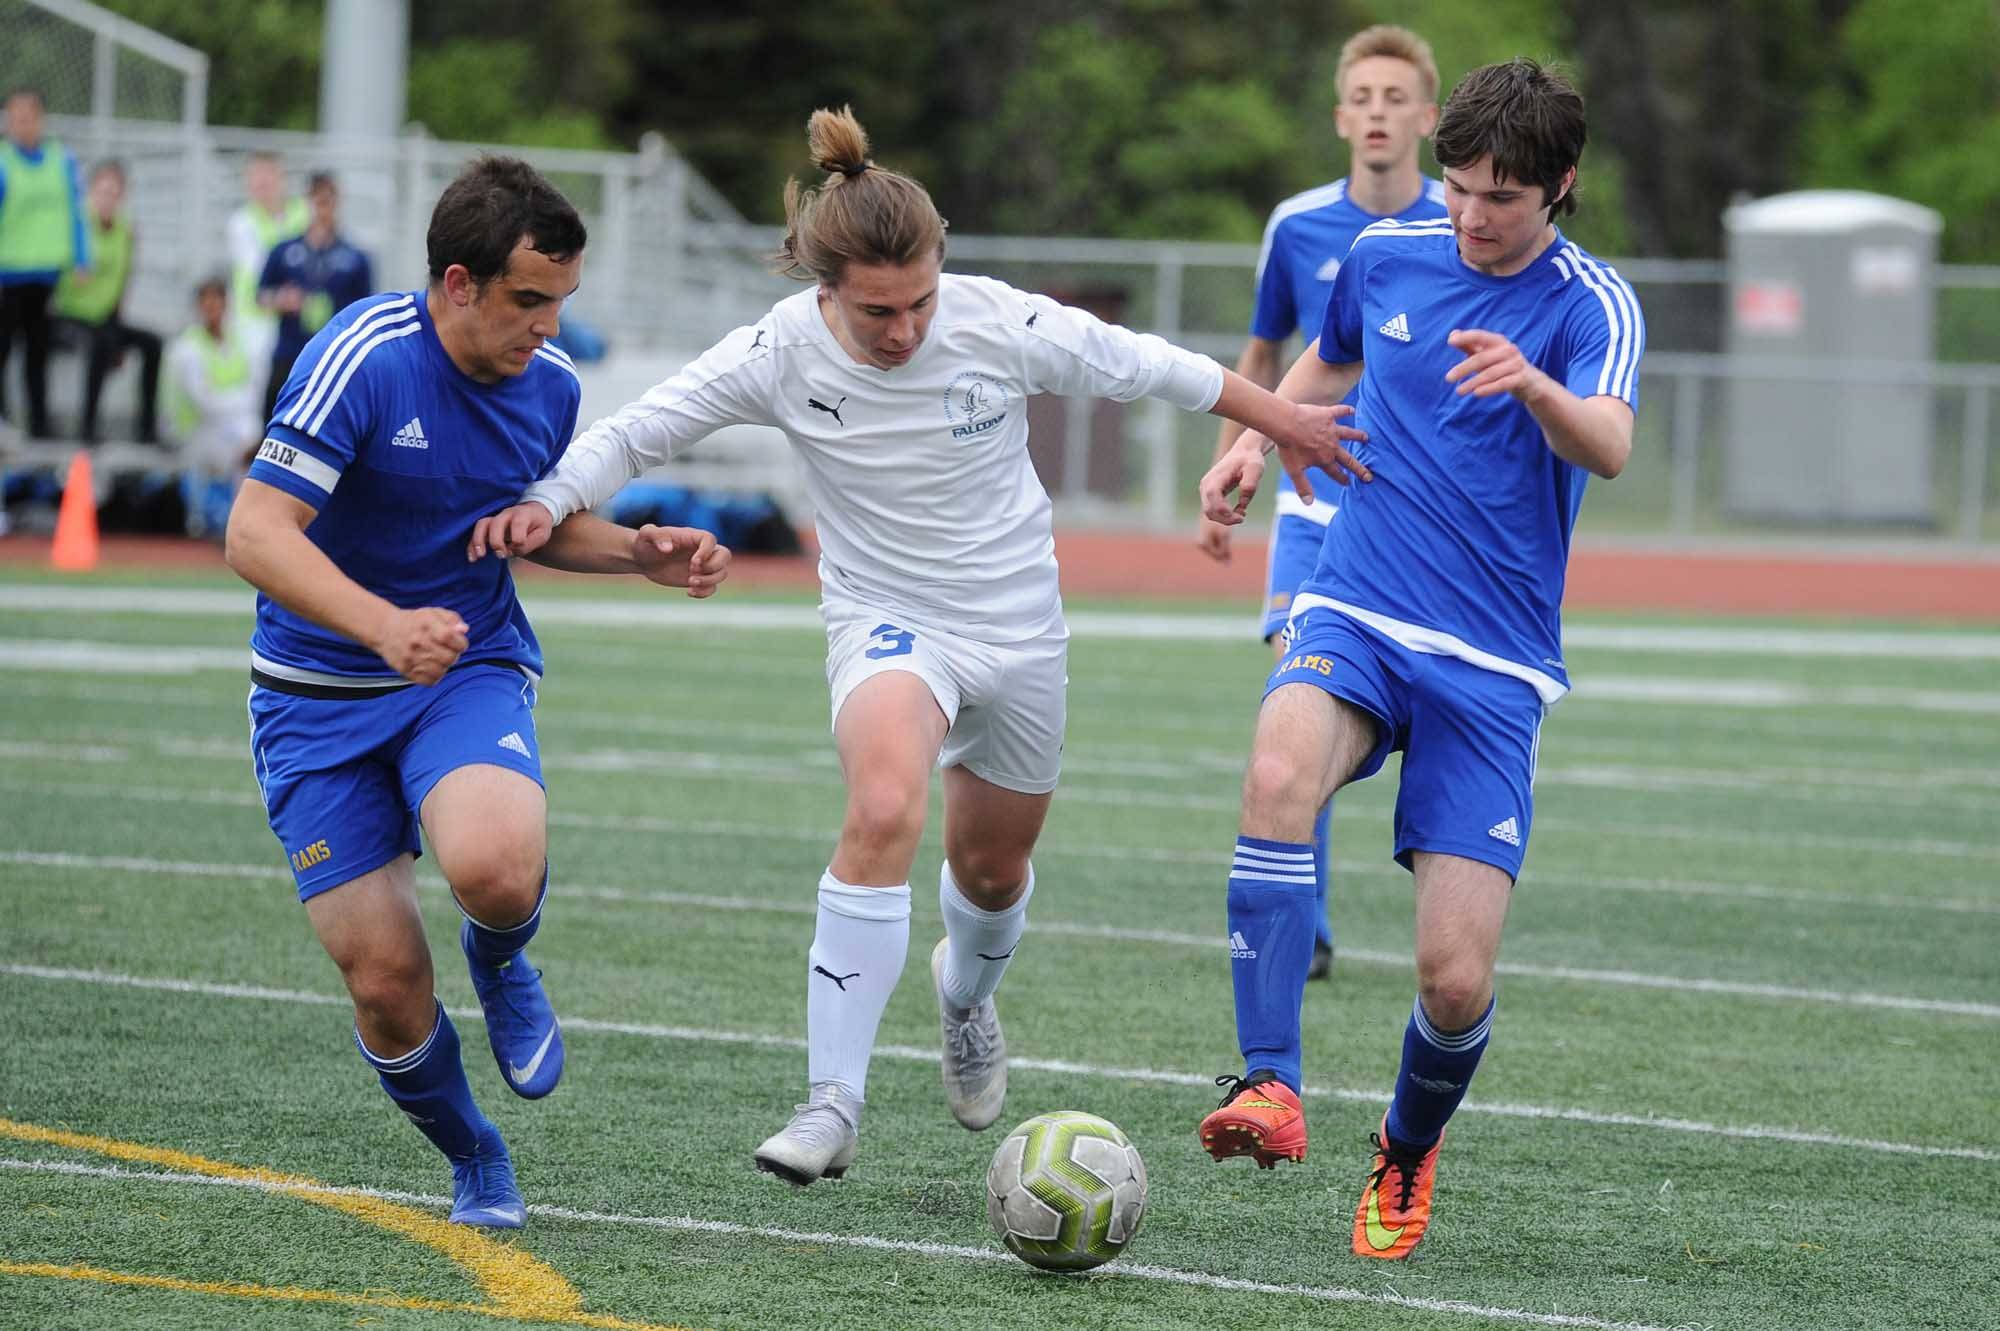 Thunder Mountain’s Gavin Gende keeps a pair of Monroe Catholic players at bay during the first half of their ASAA/First National Bank Alaska soccer state championship match Thursday evening at Service High School in Anchorage. (Michael Dinneen | For the Juneau Empire)